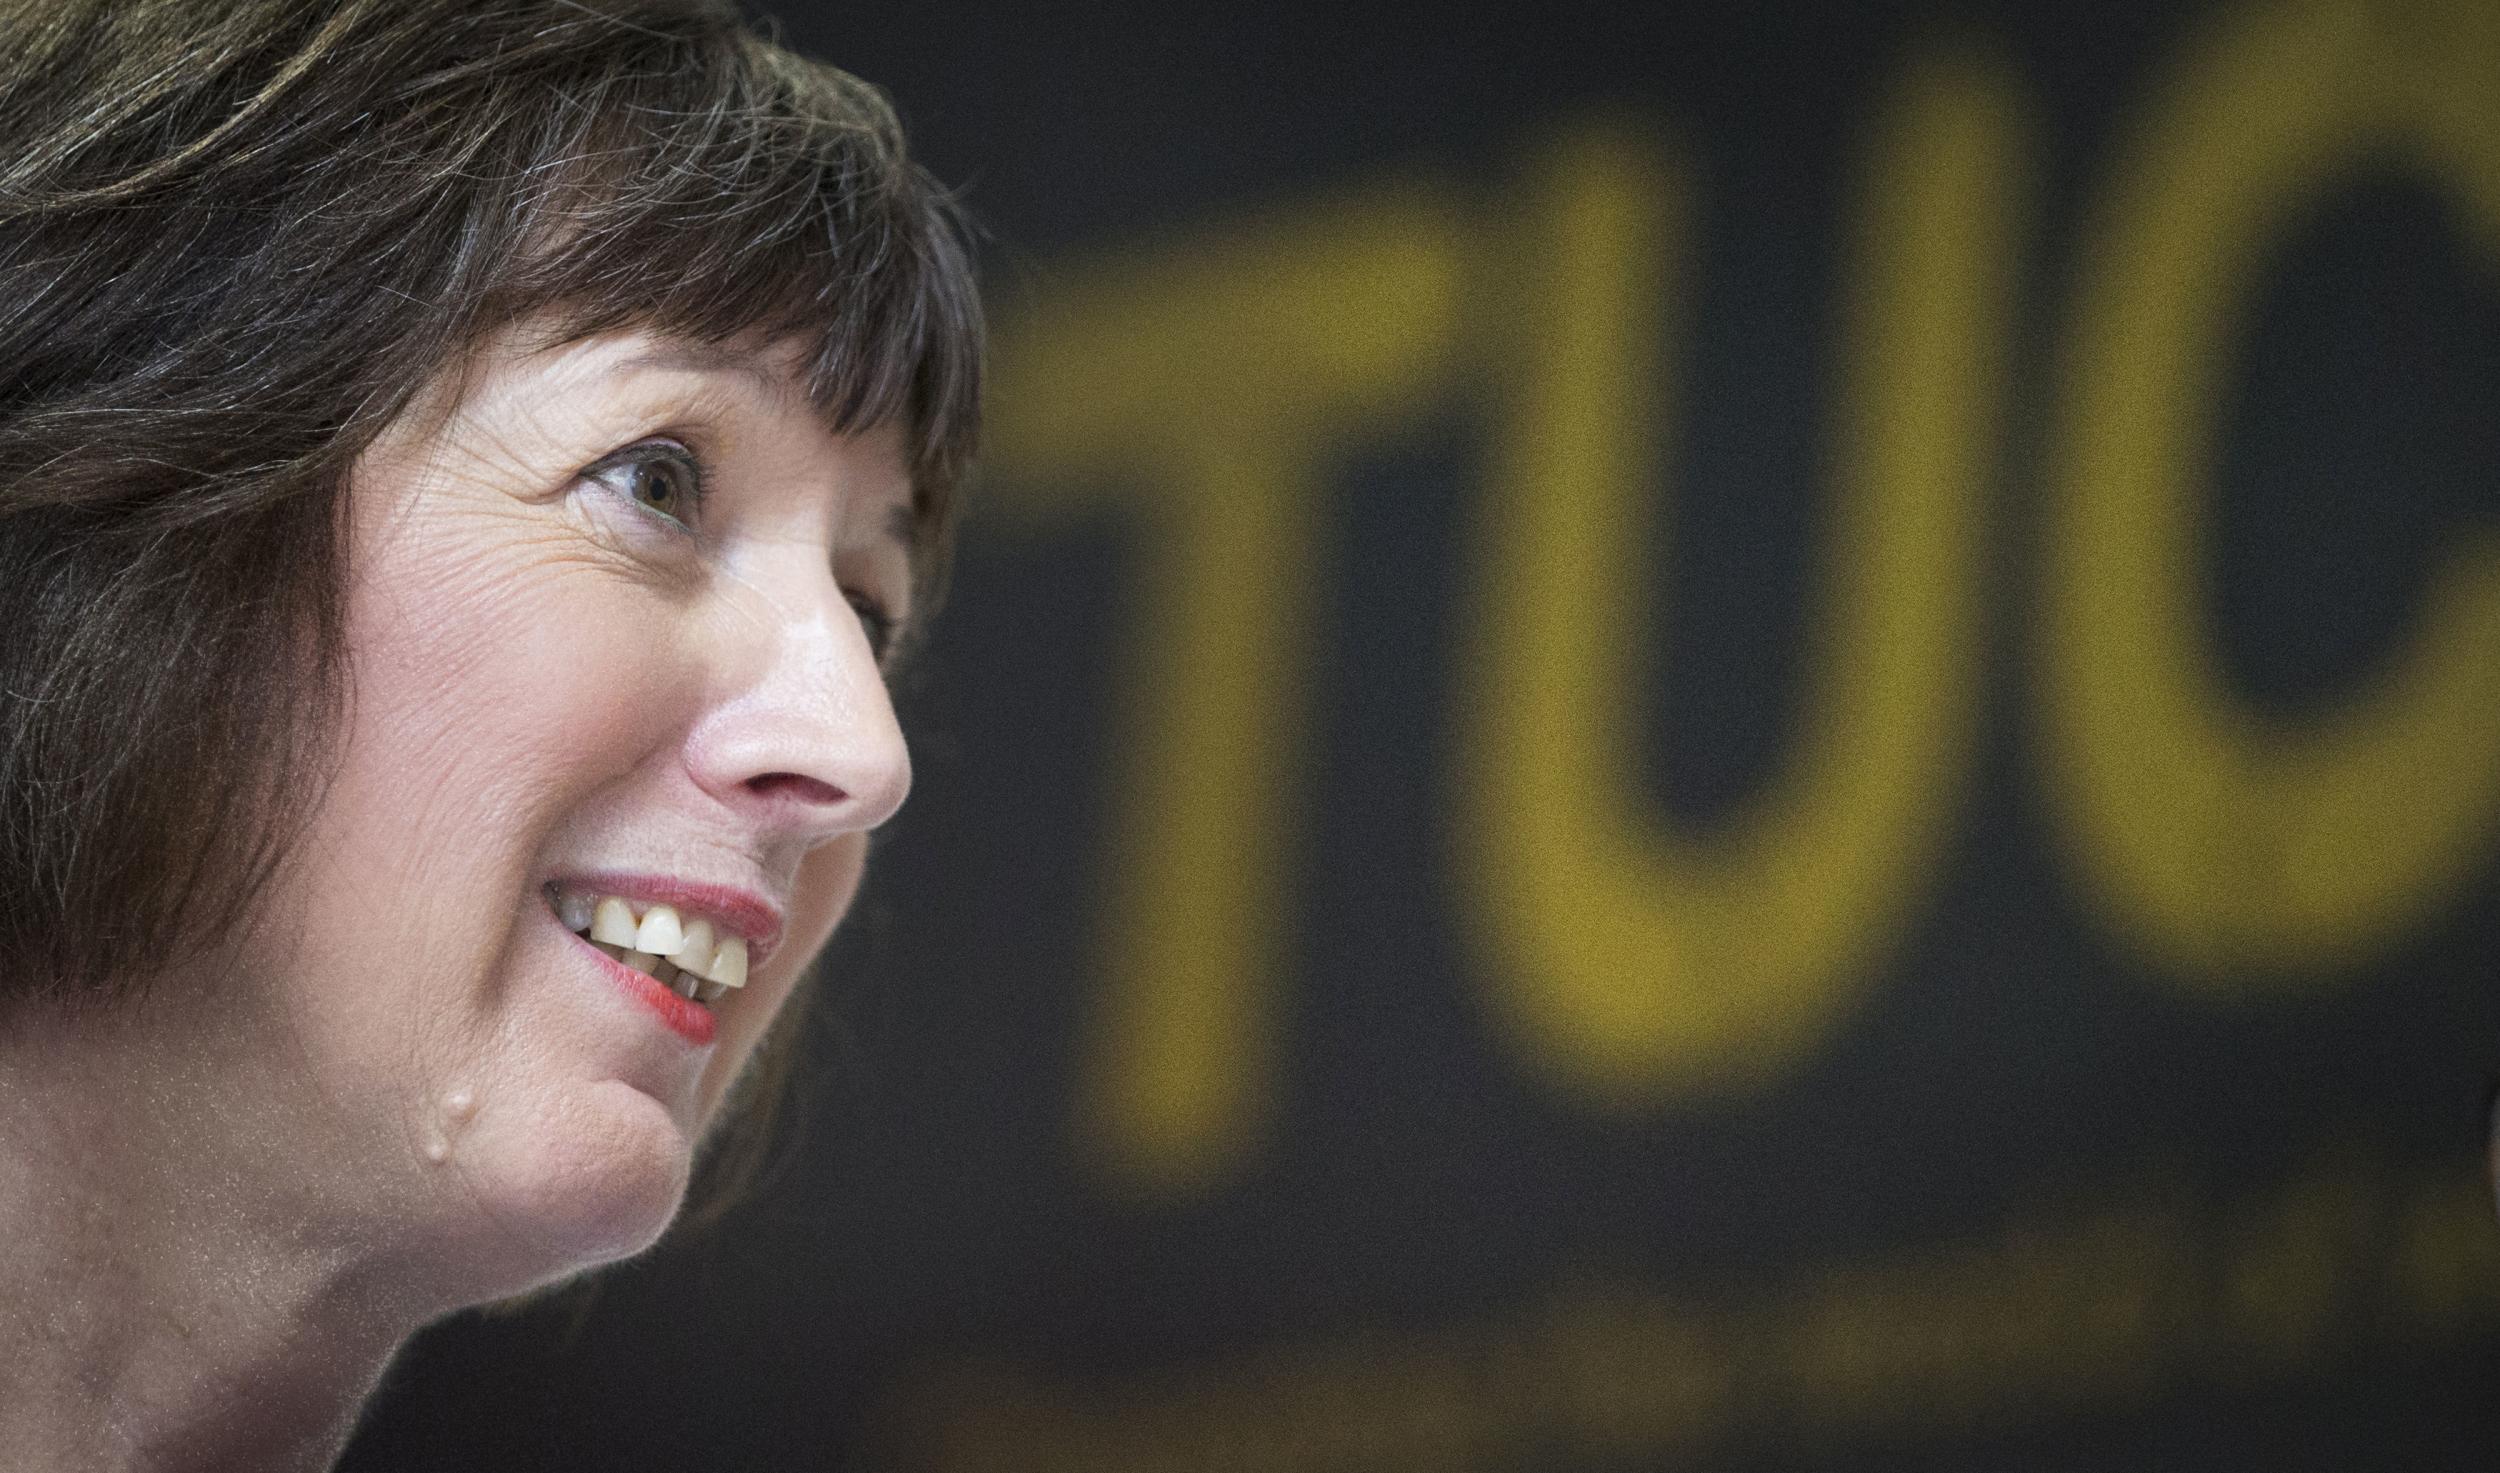 TUC head Frances O’Grady questioned the deal’s potential impact on workers’ rights